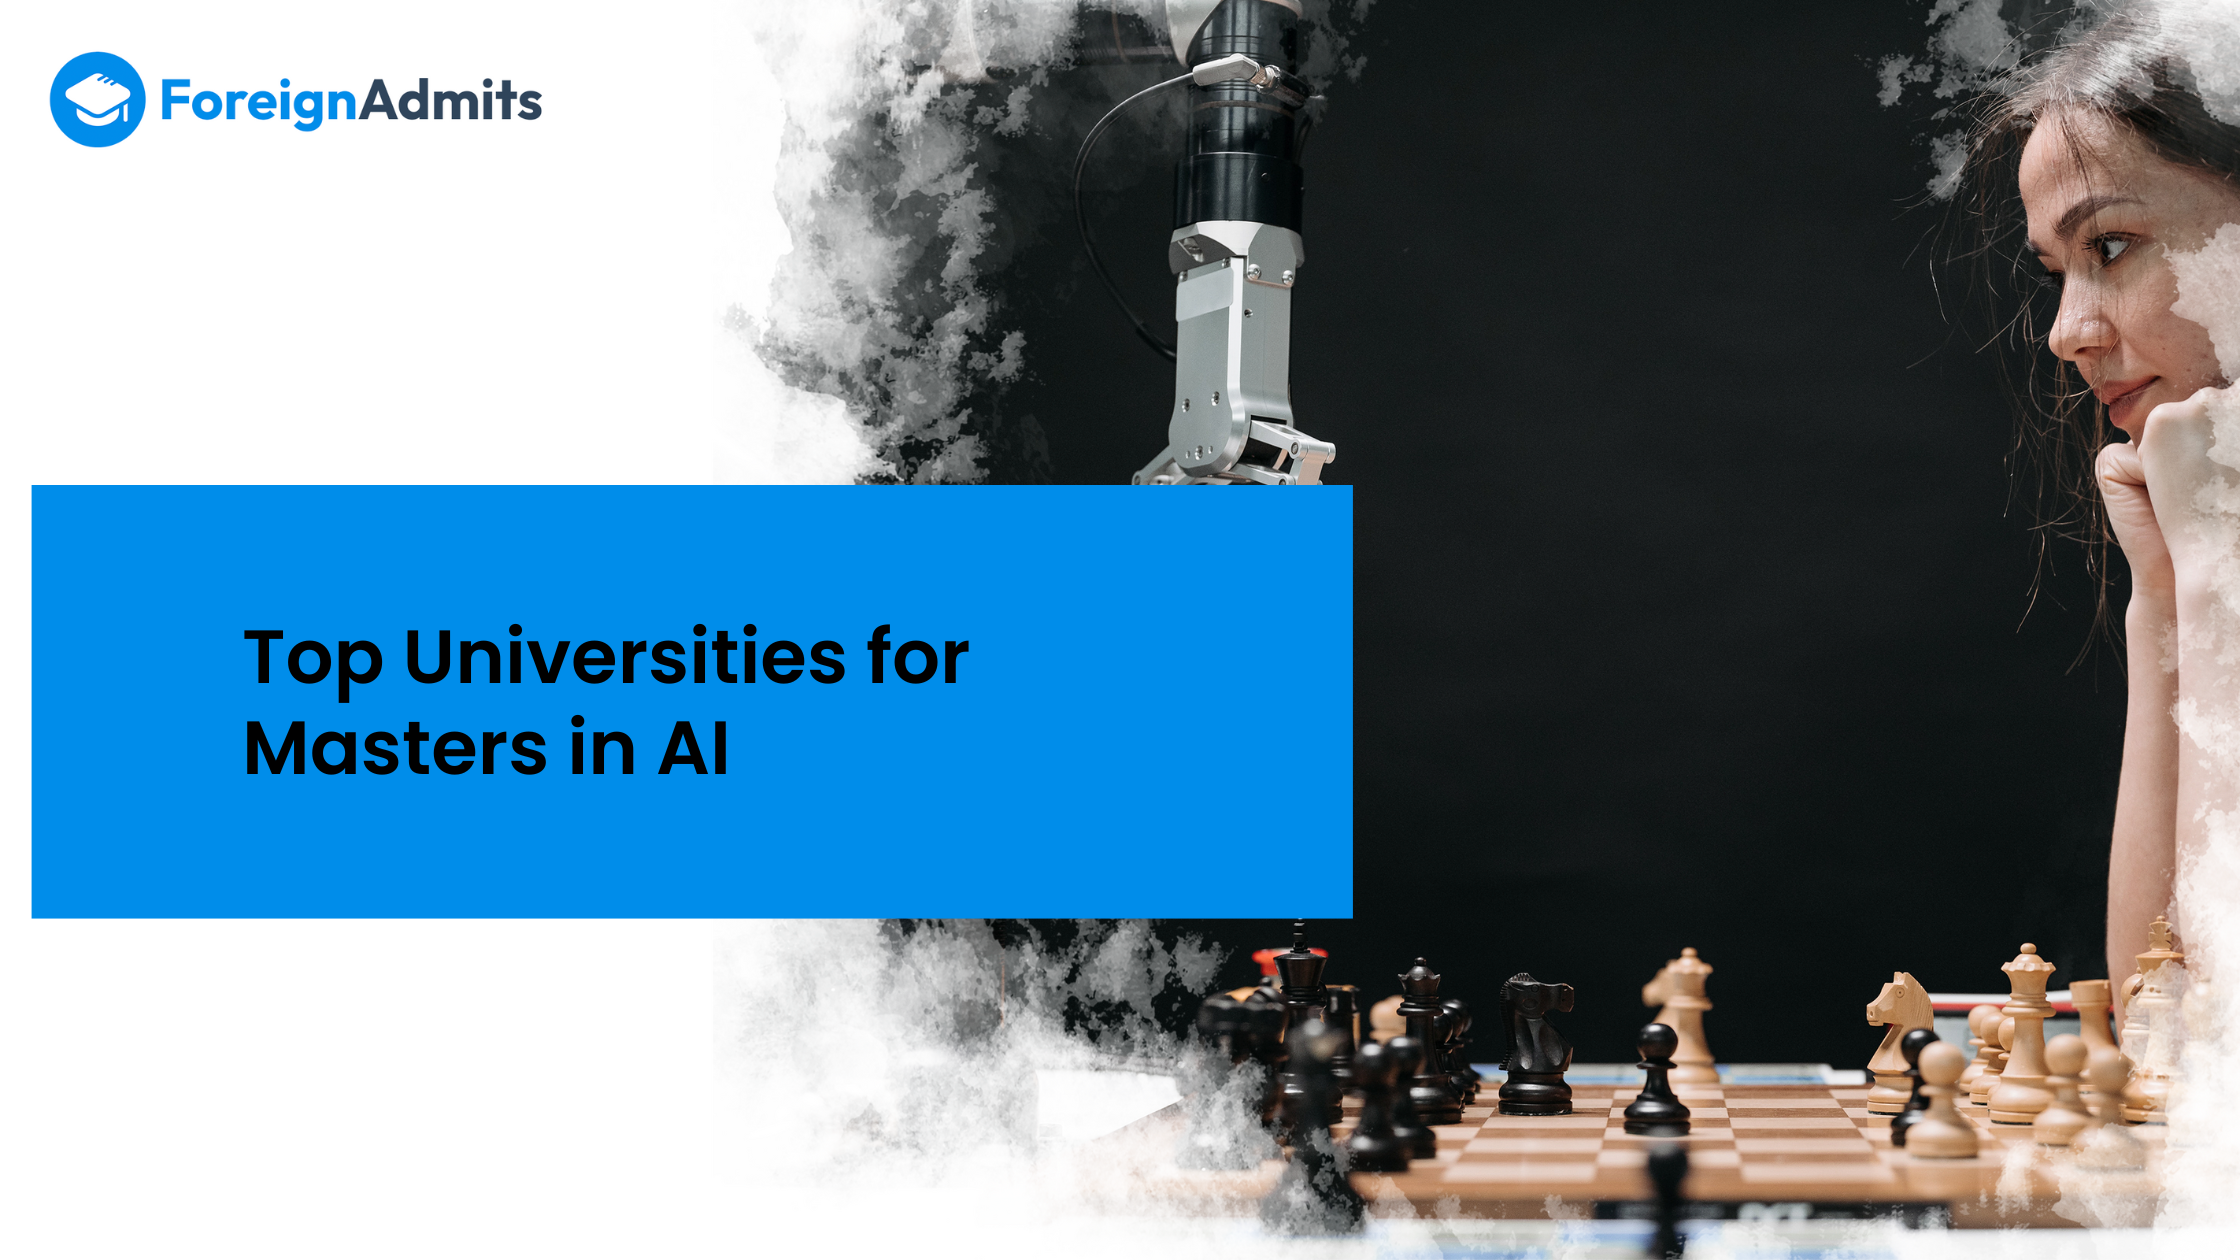 Top Universities for Masters in AI (Artificial Intelligence)